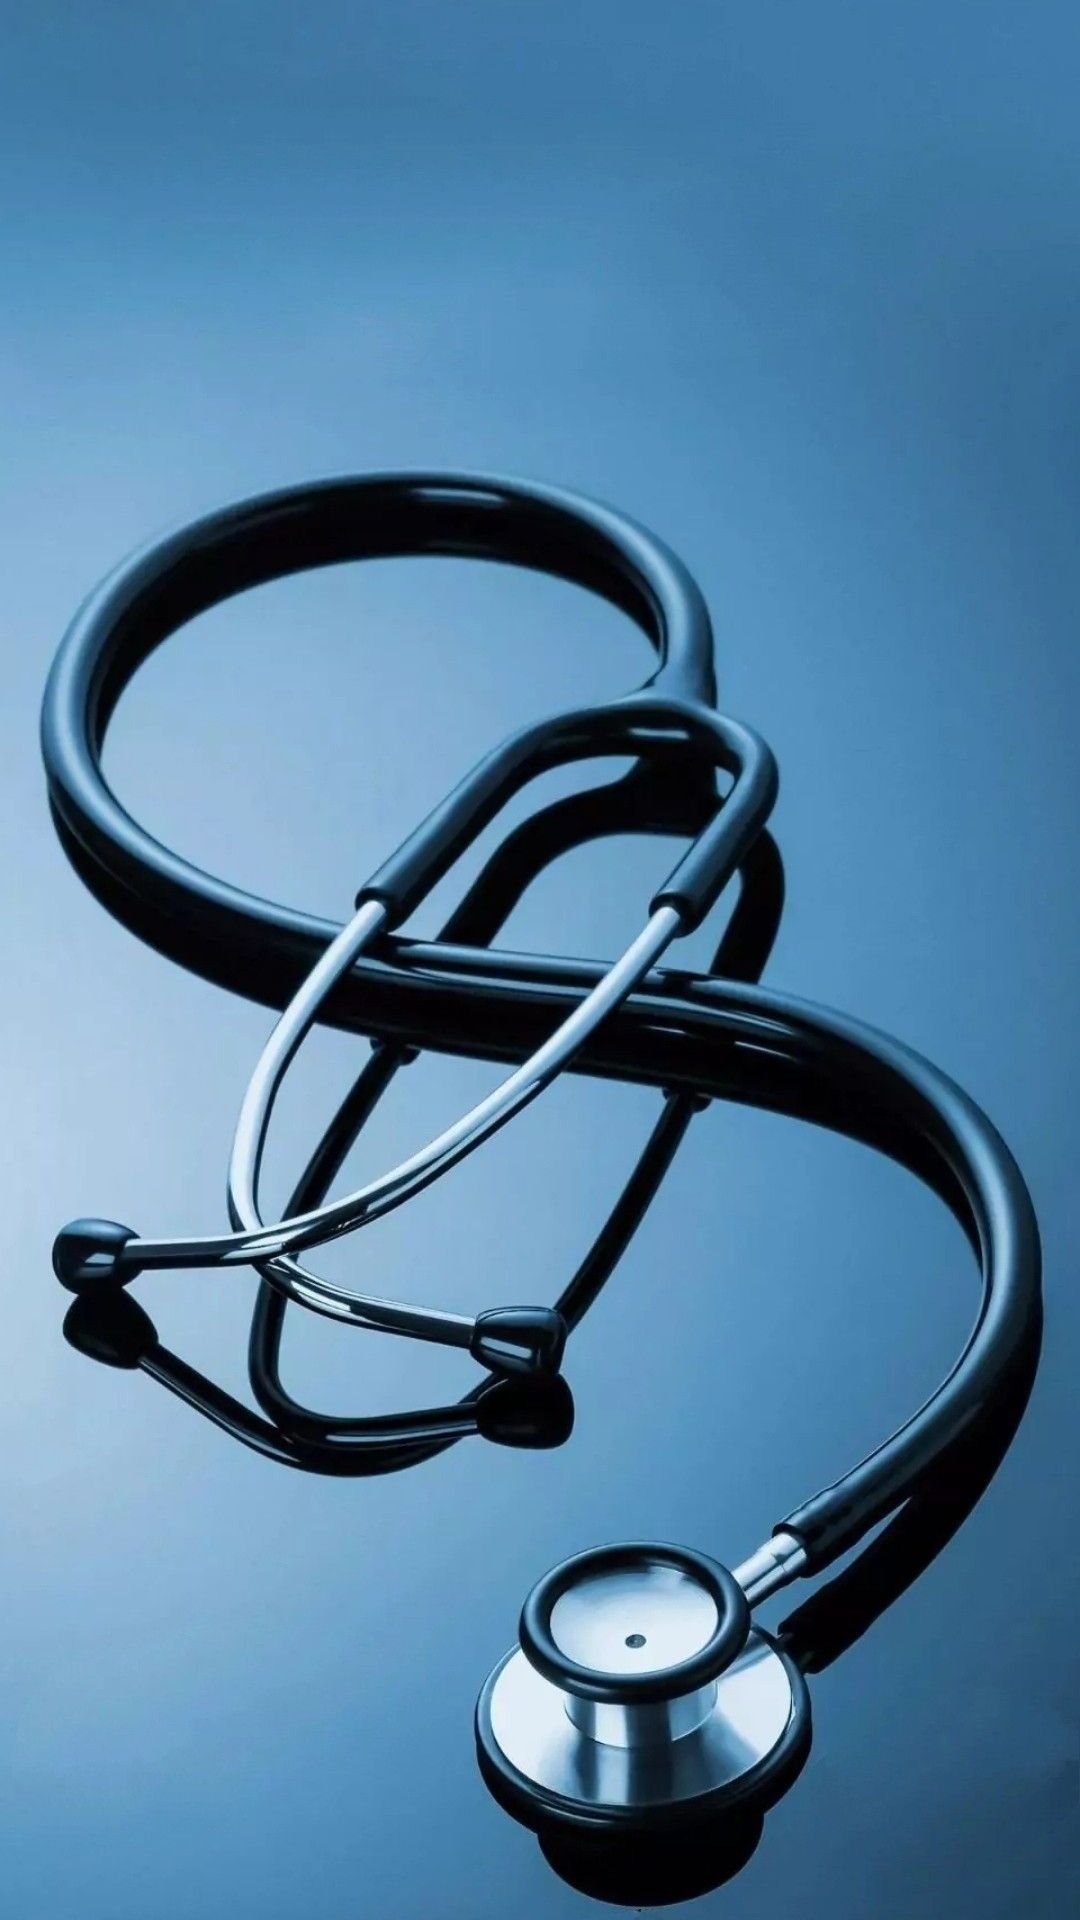 Stethoscope Wallpaper Download | MobCup